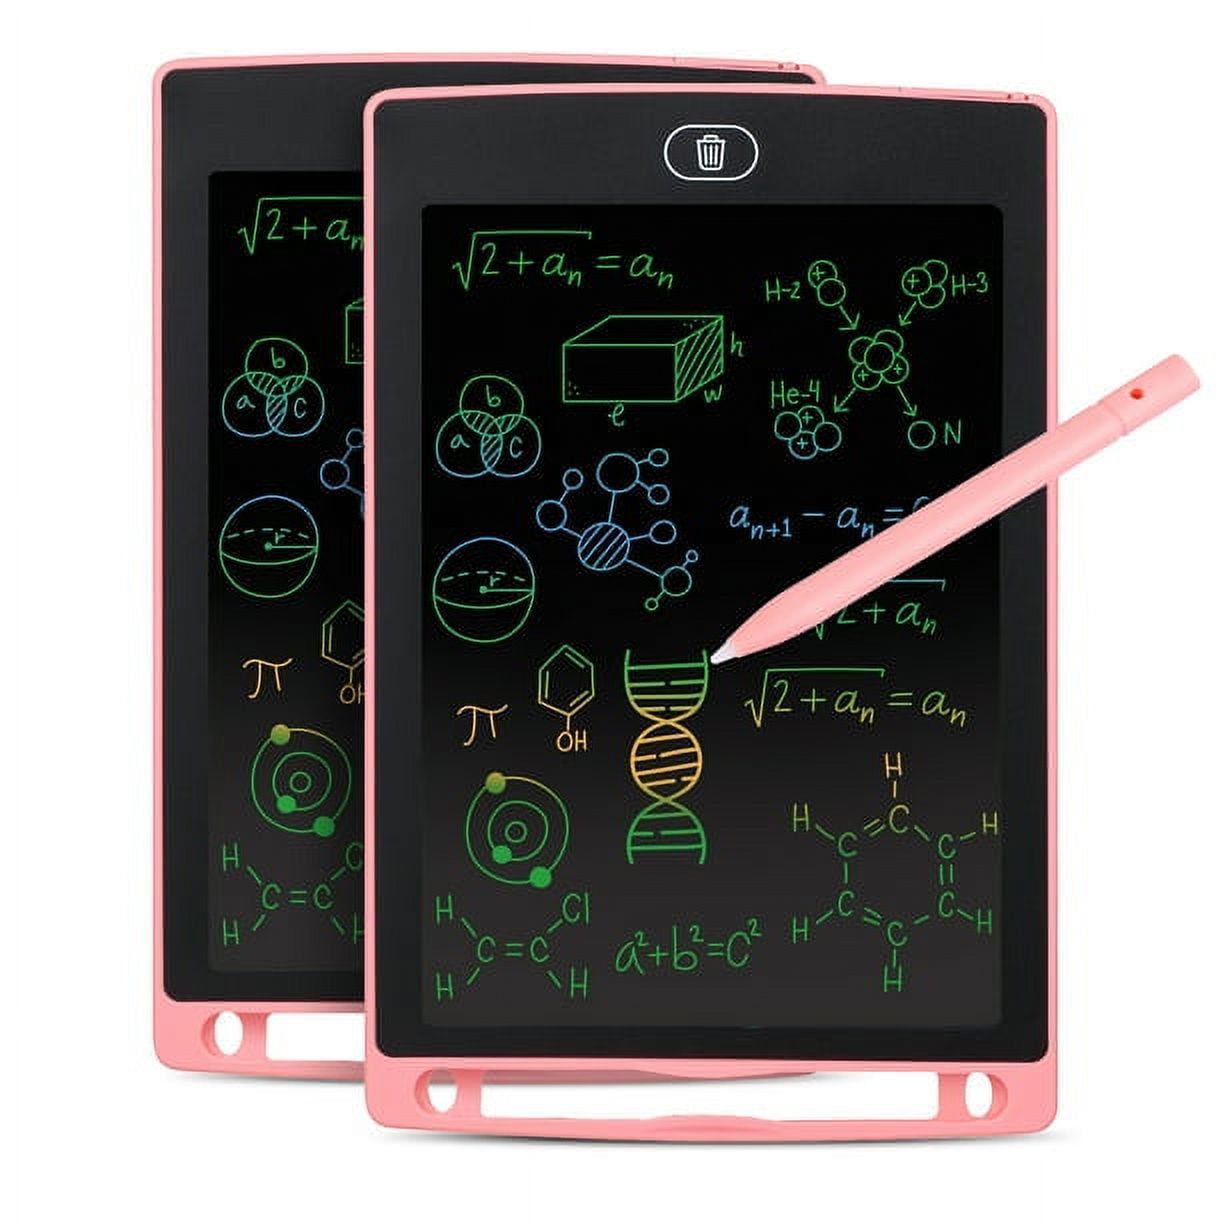 Clear Stock) FOXBOX Kids LCD Drawing Pad Writing tablet Writing